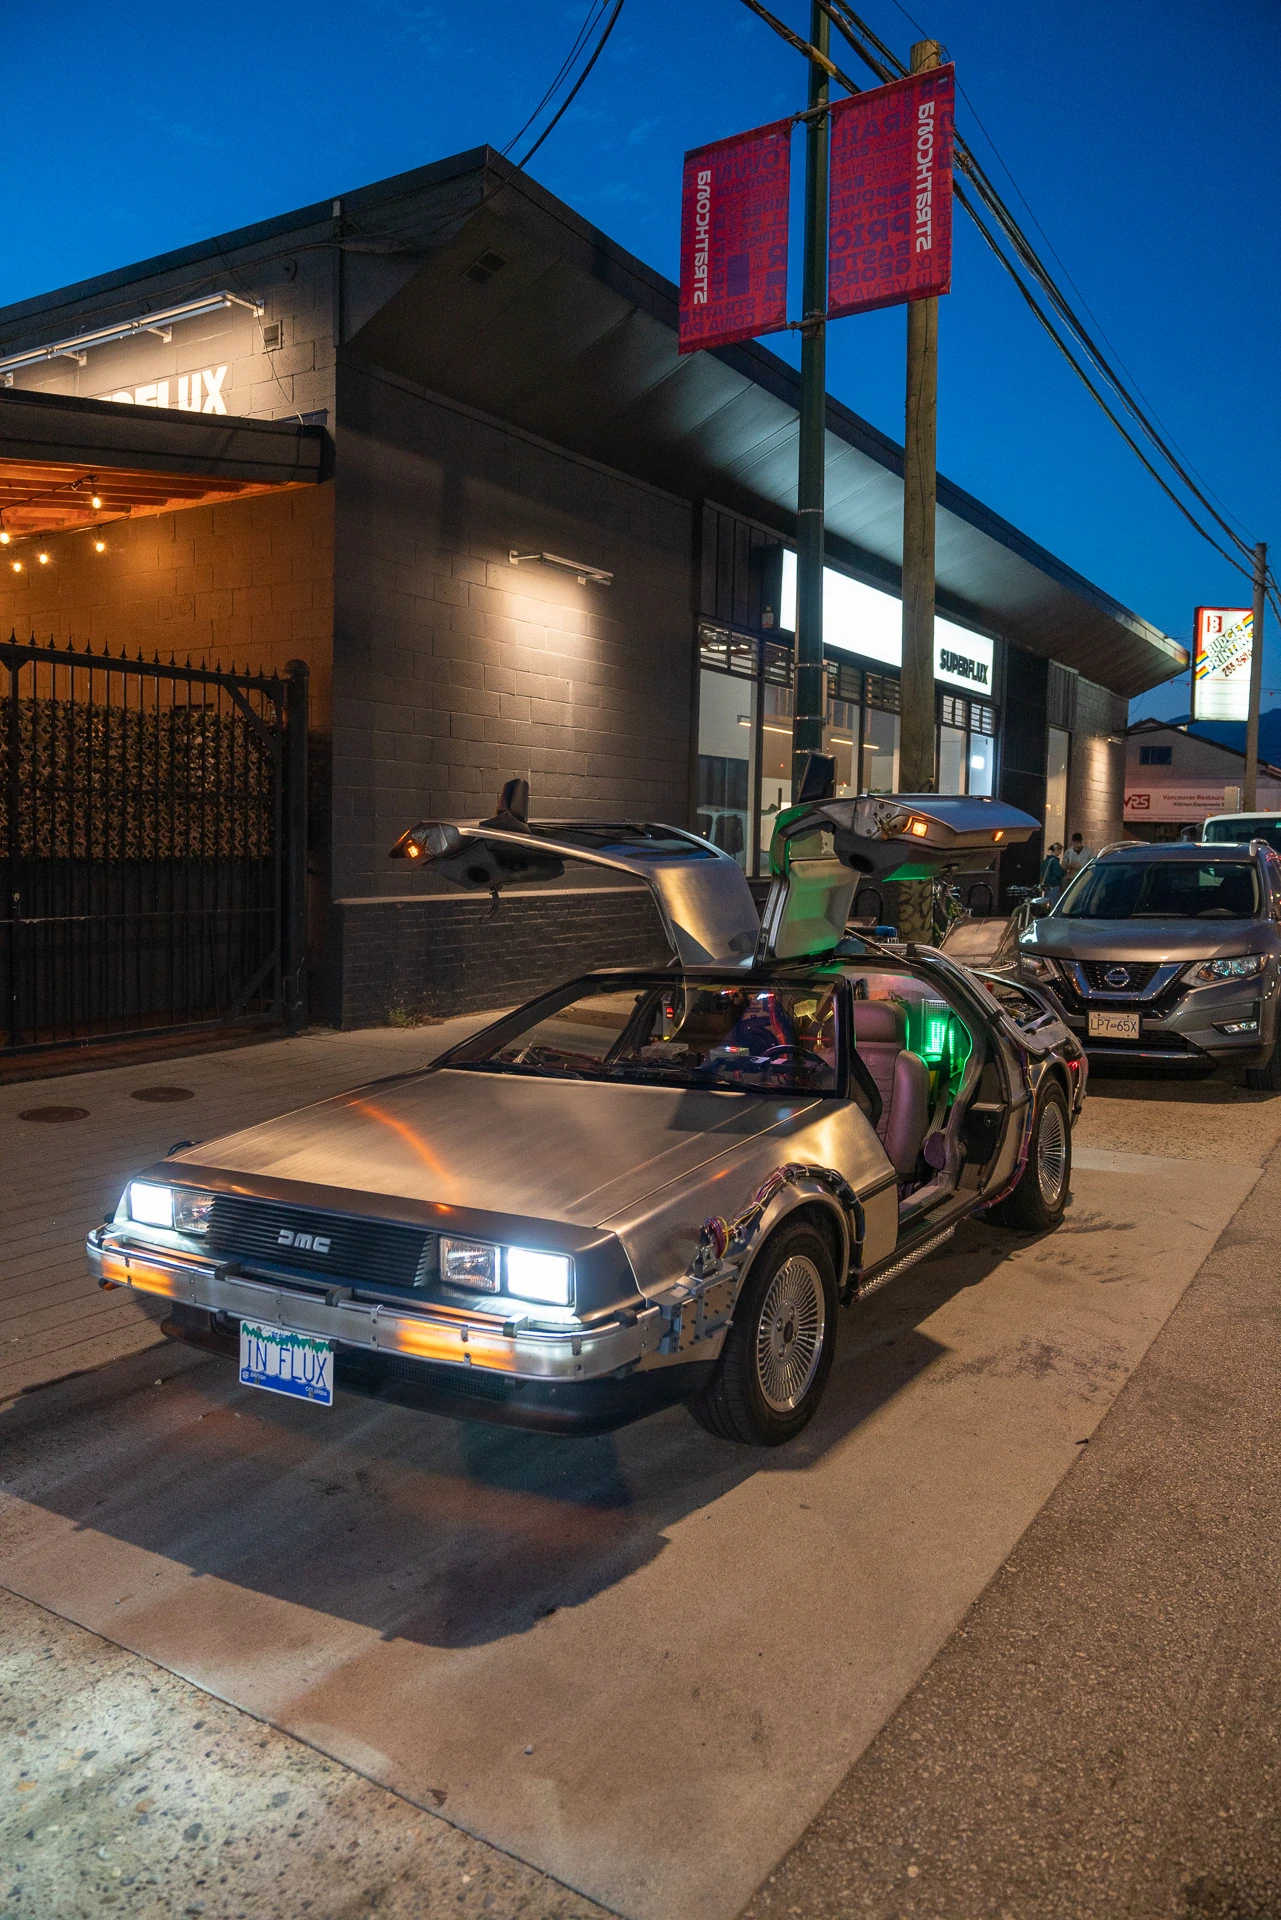 DeLorean 'Time Machine' replica parked at Superflux Beer, Vancouver, BC.